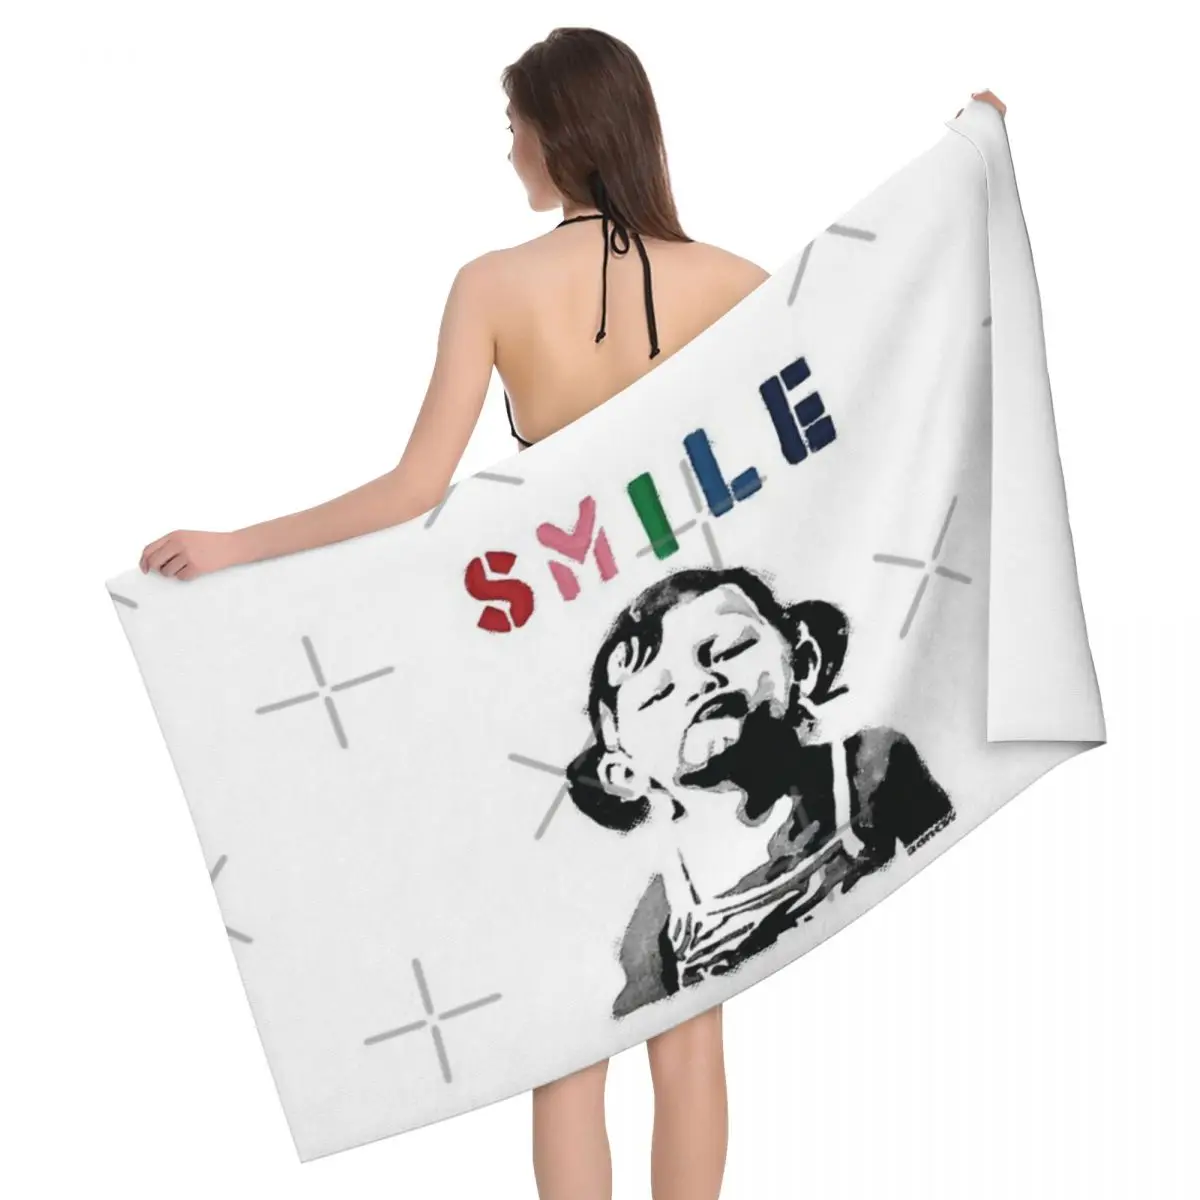 

Banksy Graffiti Quote SMILE With Girl Not Smiling Girl 80x130cm Bath Towel Brightly Printed For Travelling Personalised Pattern